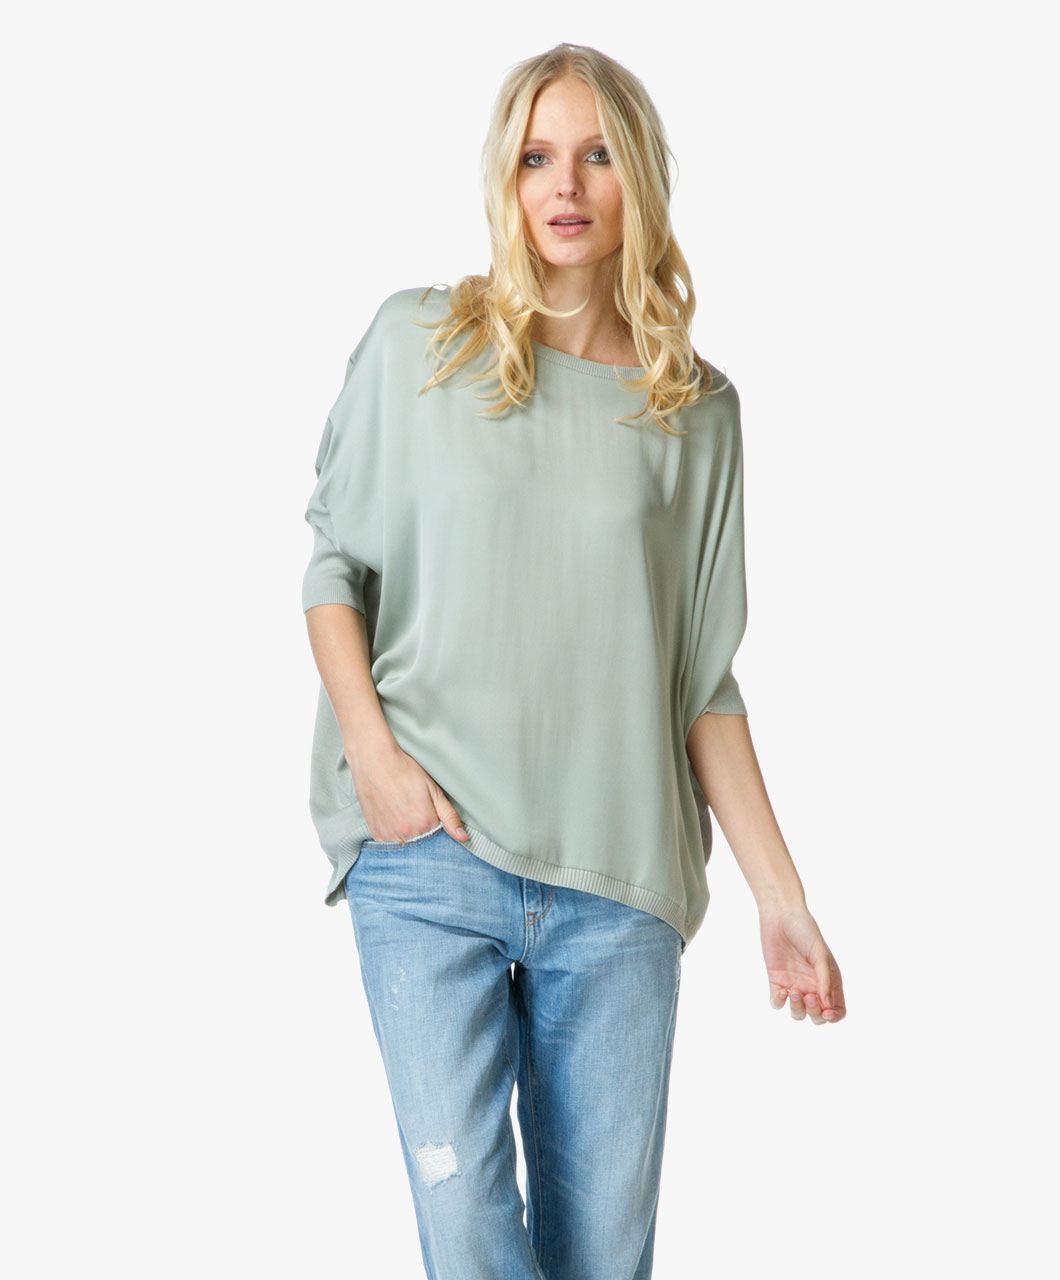 Shop the look - Trend color: Mint green | Perfectly Basics